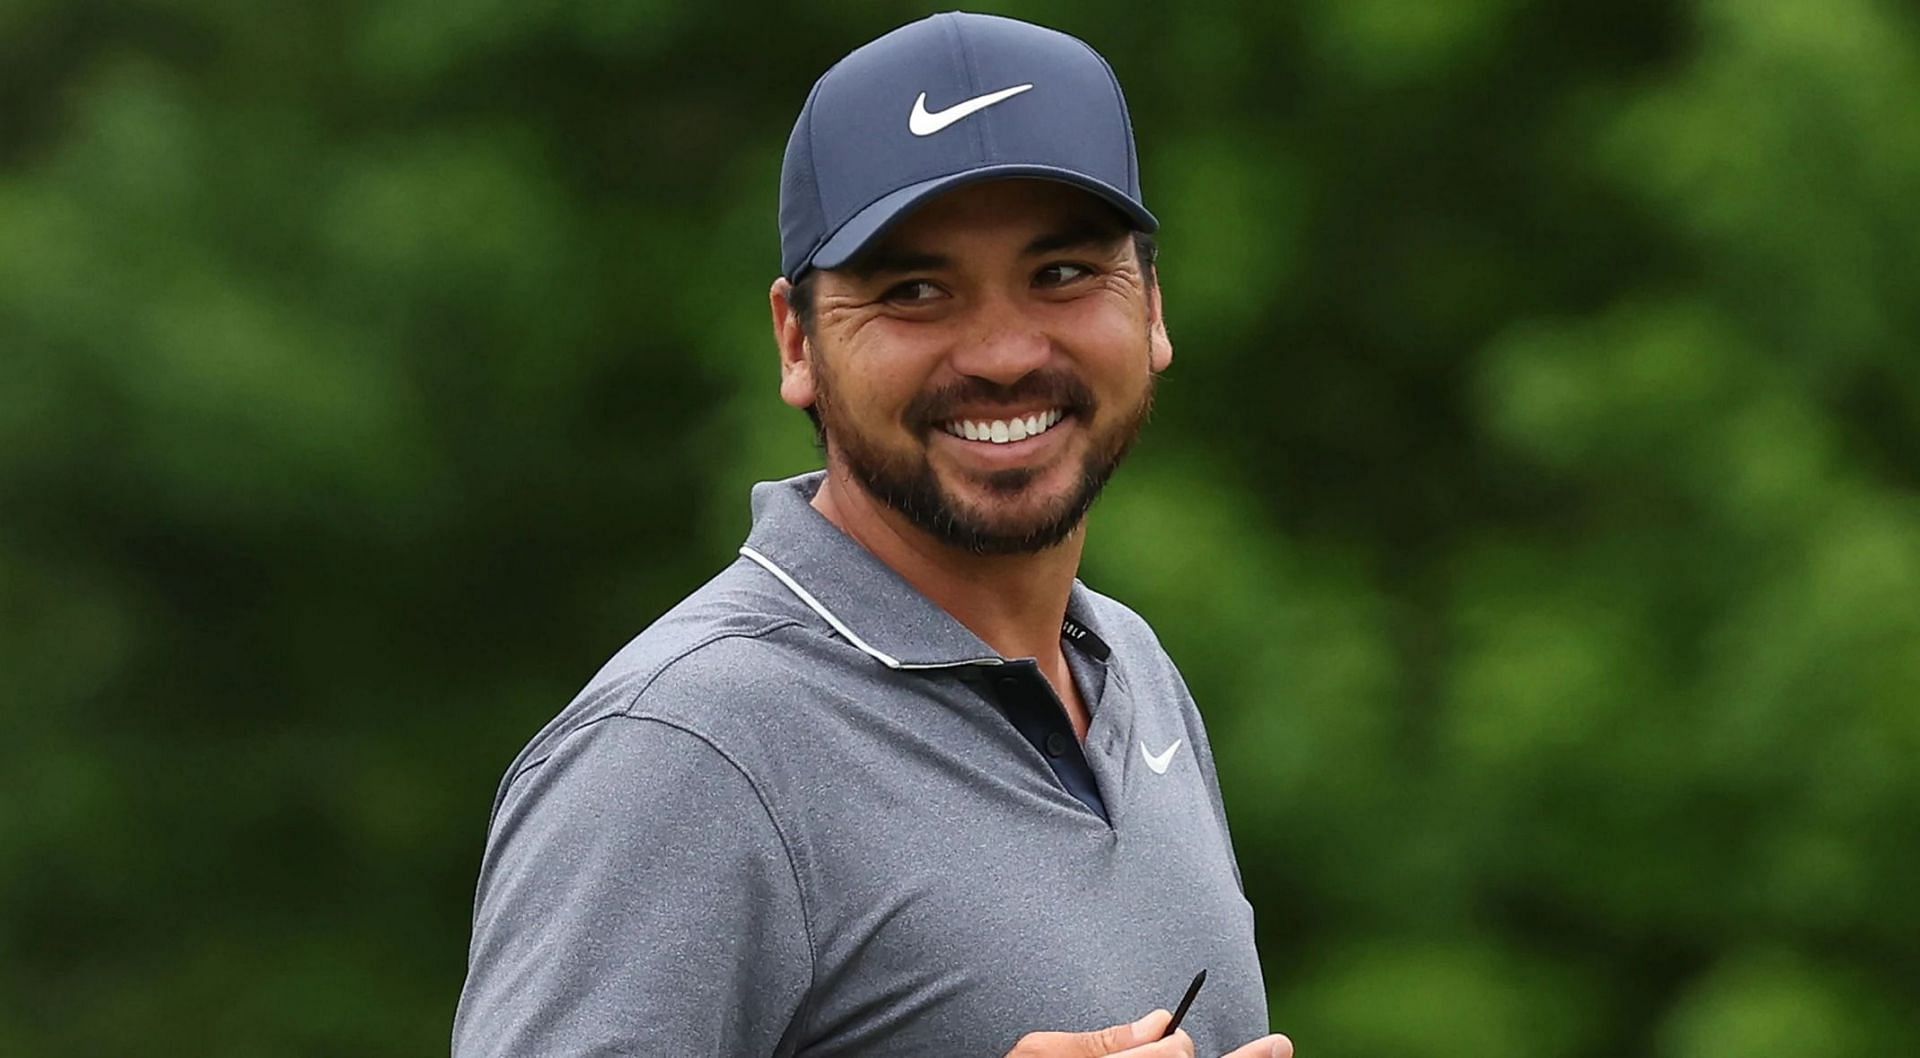 Jason Day is not going anywhere from PGA Tour for now